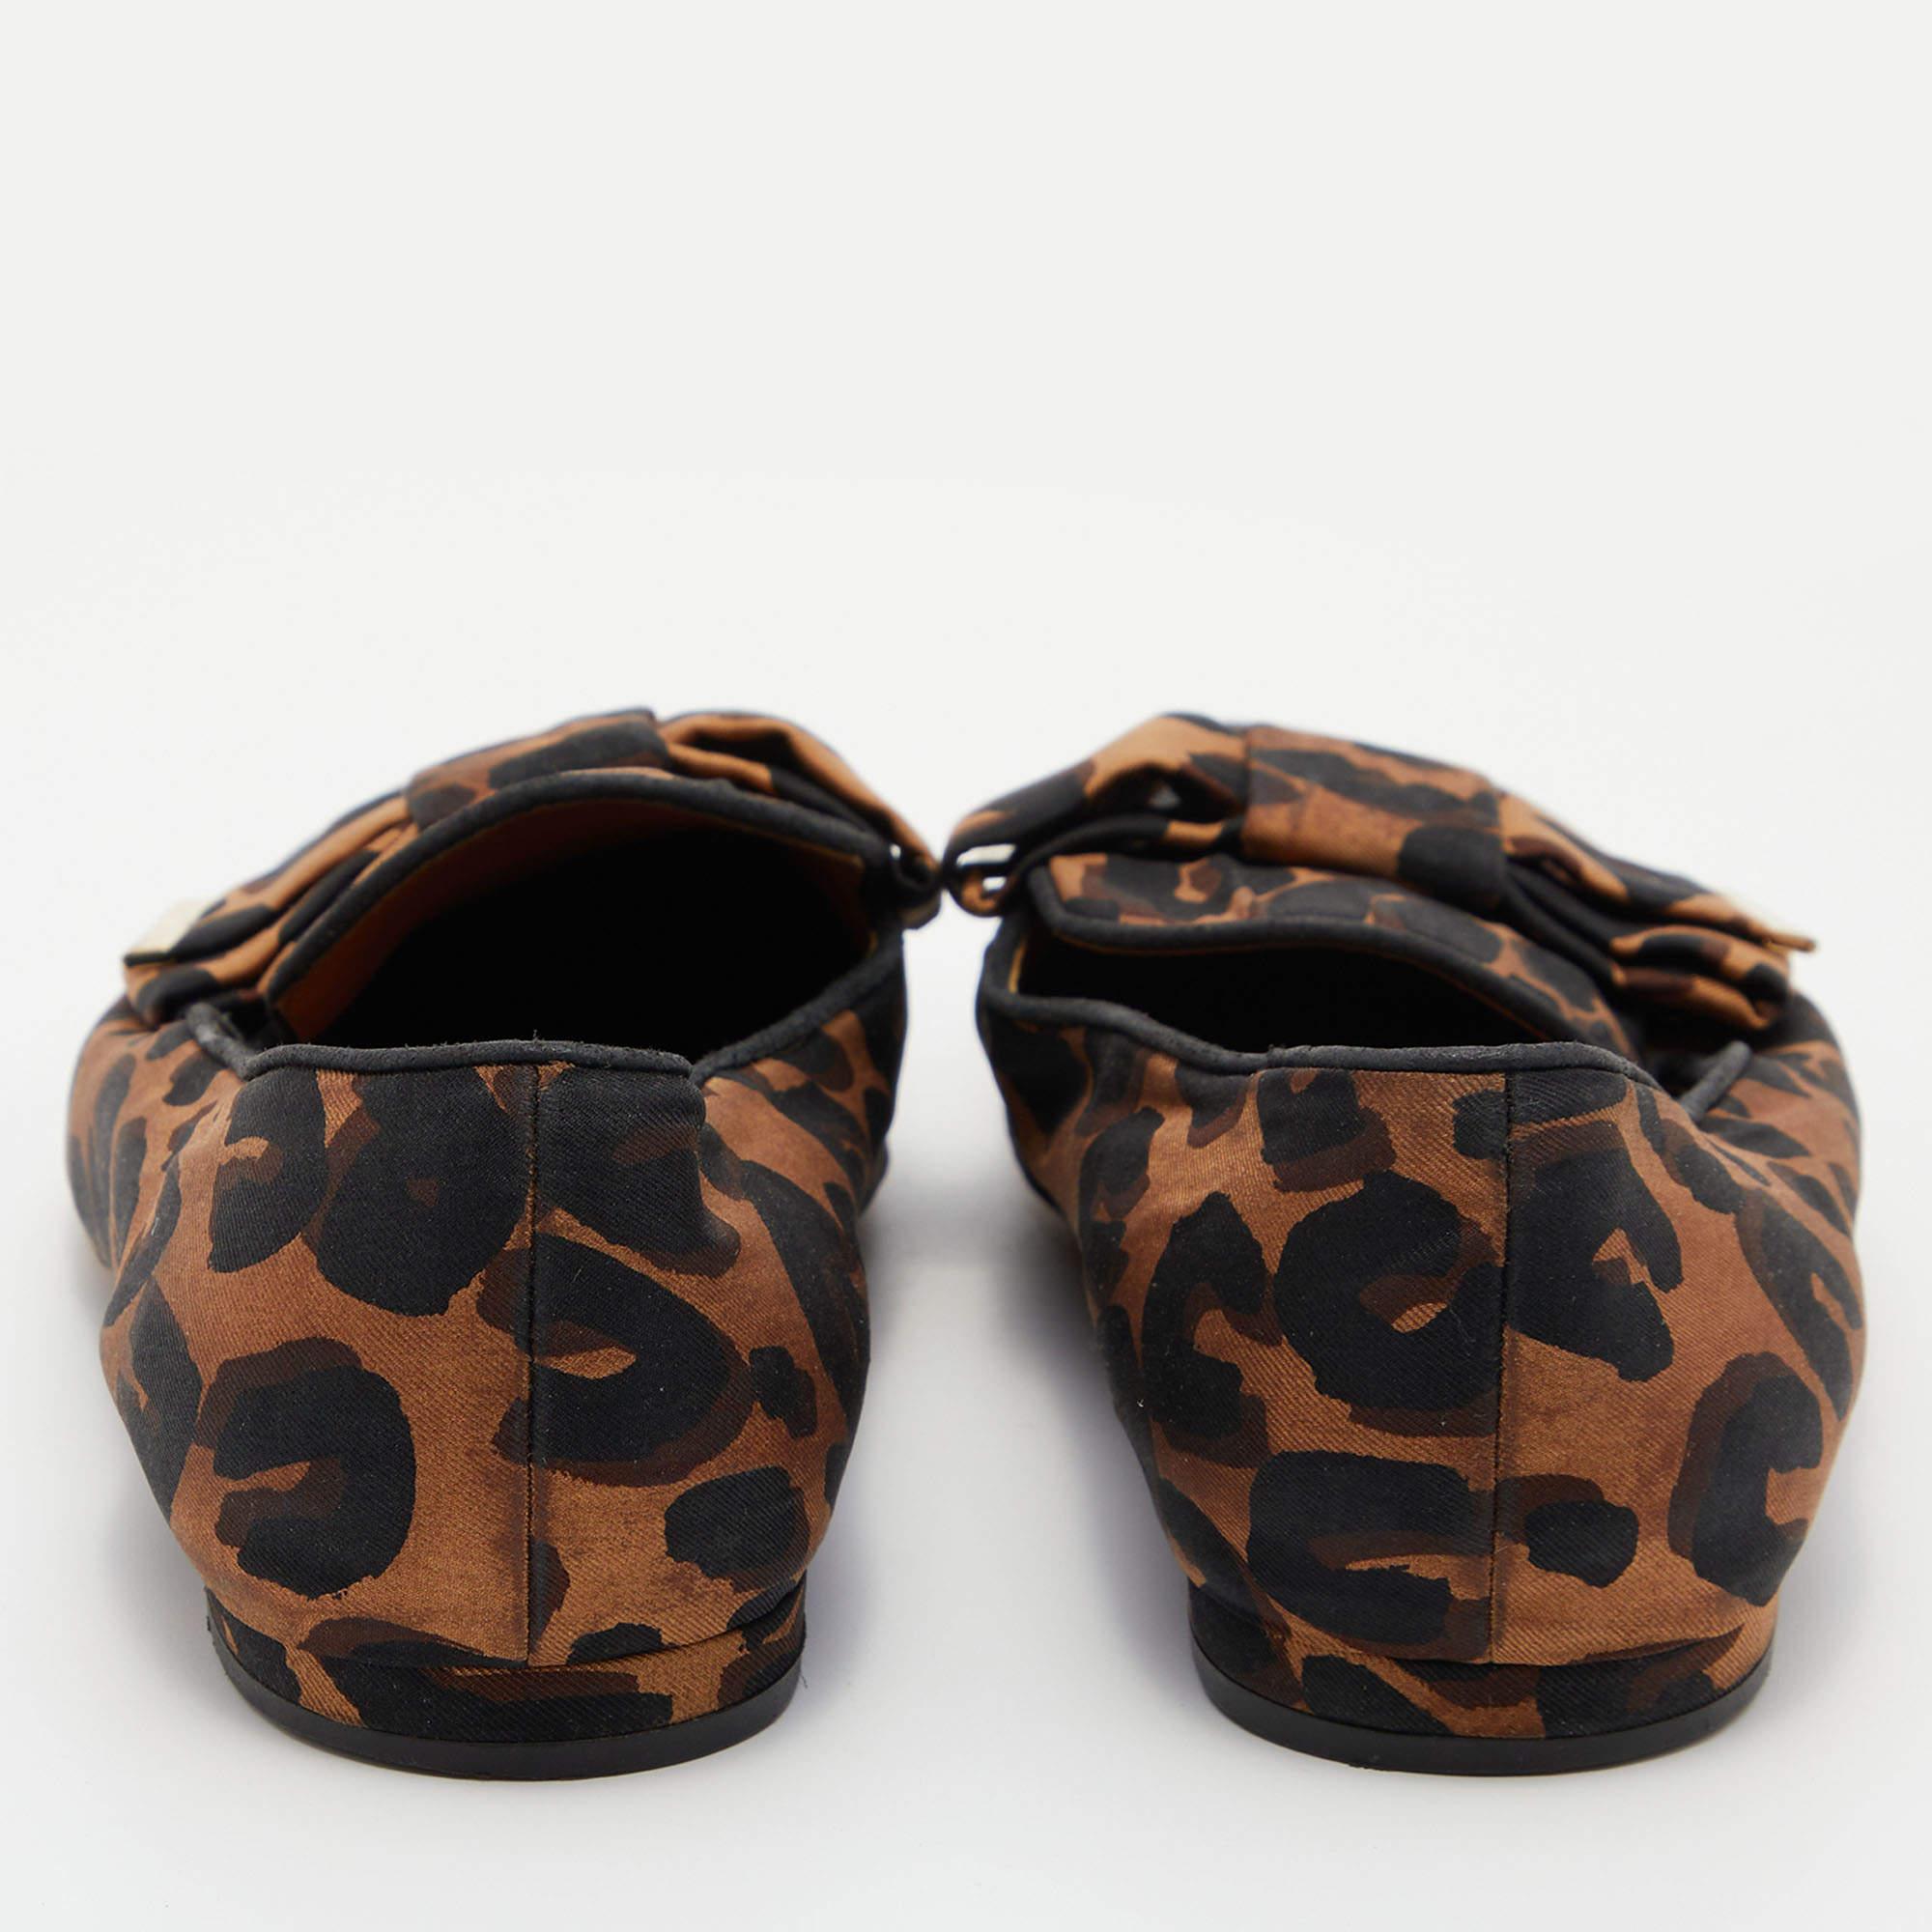 A perfect blend of luxury, style, and comfort, these designer smoking slippers are made using quality materials and can be paired with a host of outfits from your wardrobe.

